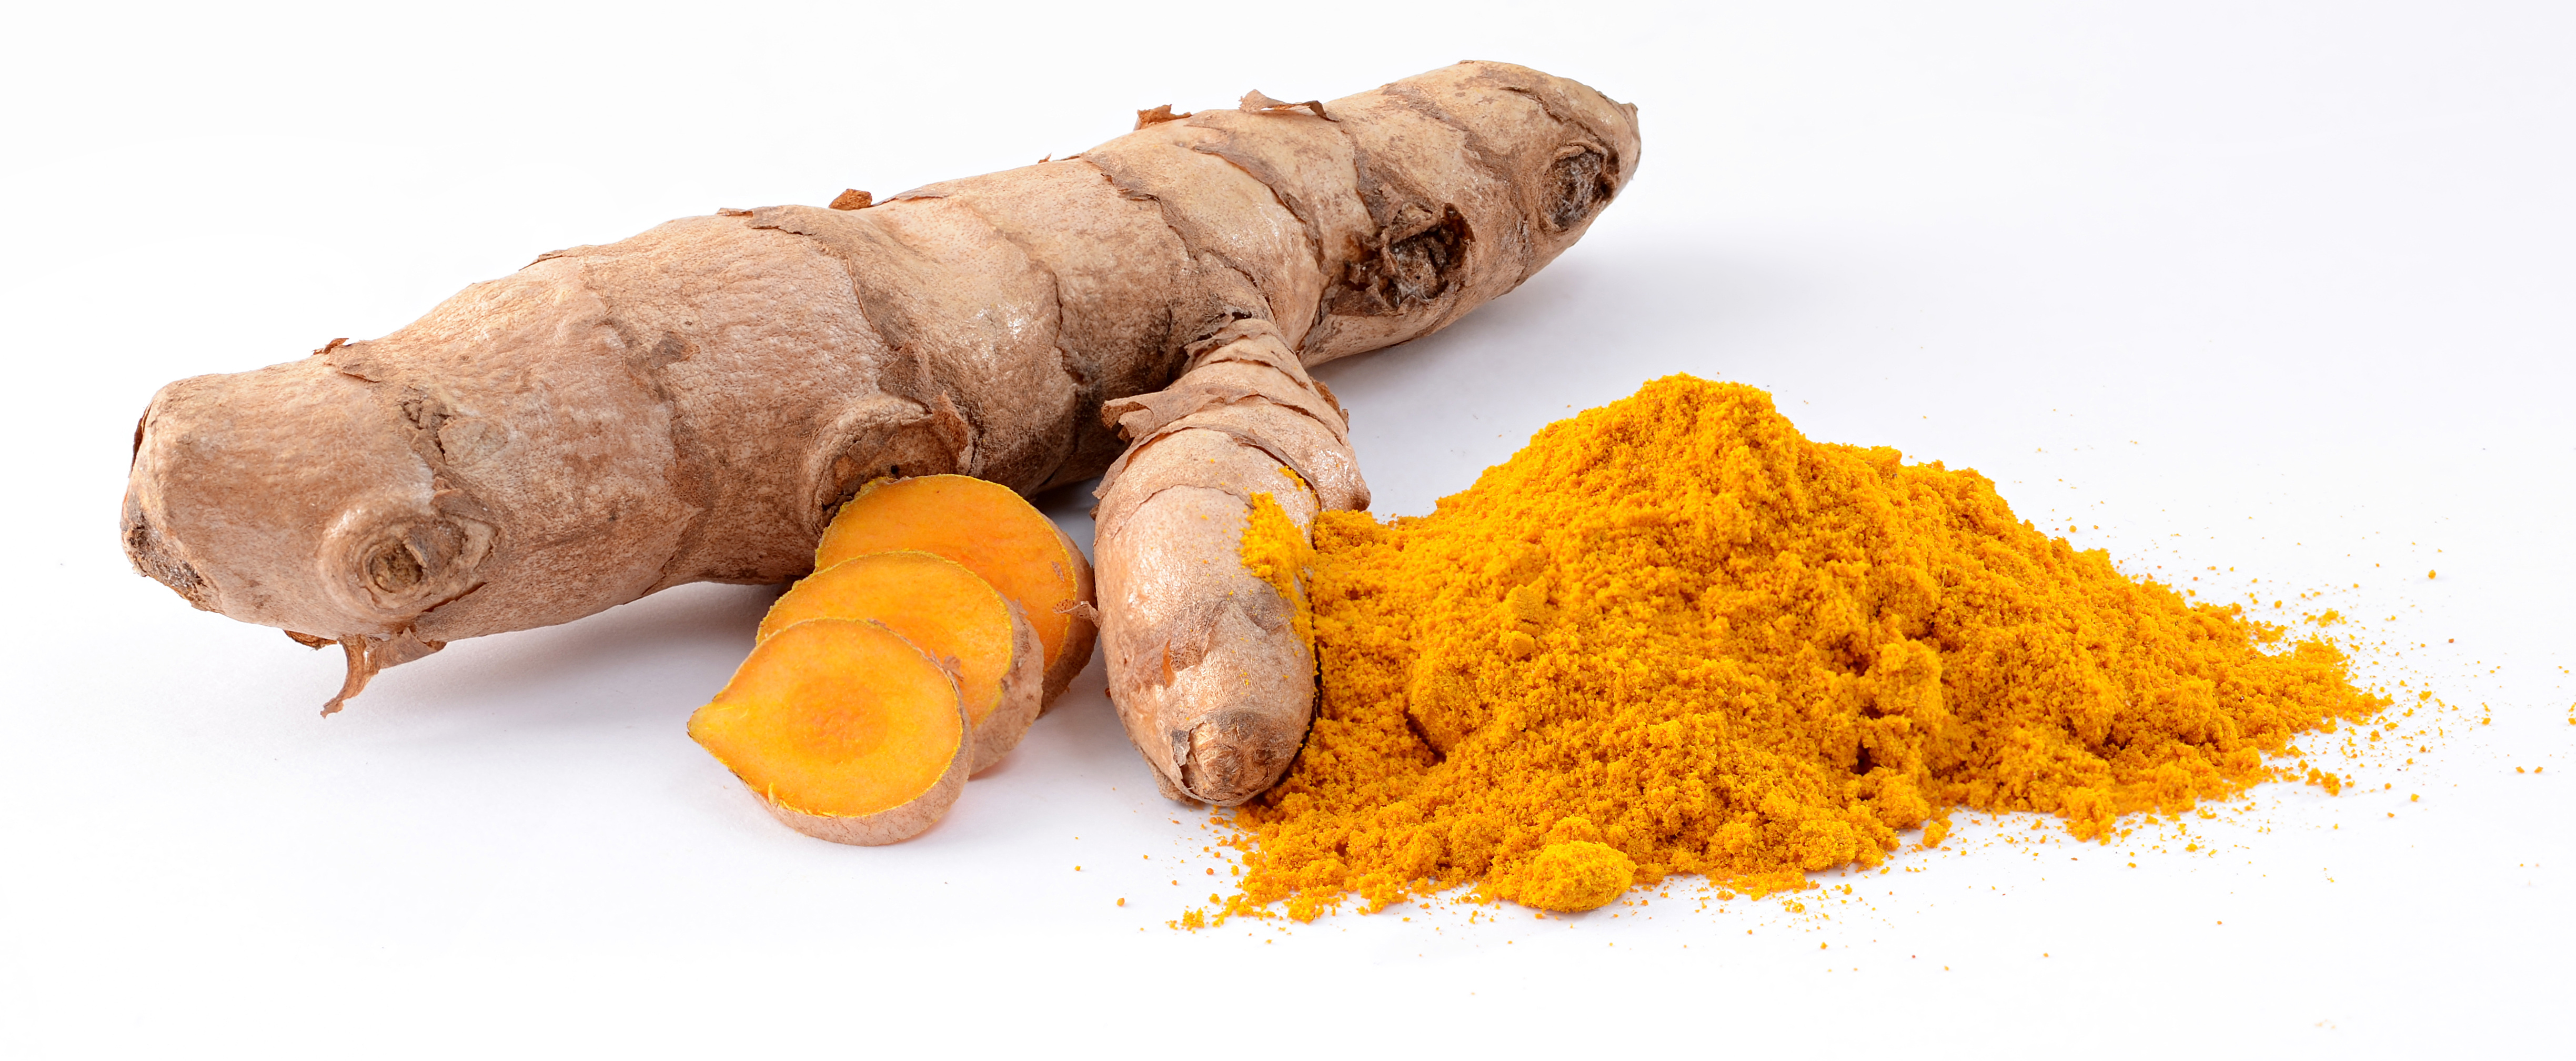 Did you ever heard of turmeric and all of his benefits? But the one question remains: can it turn you into a powerhouse? Find out here.